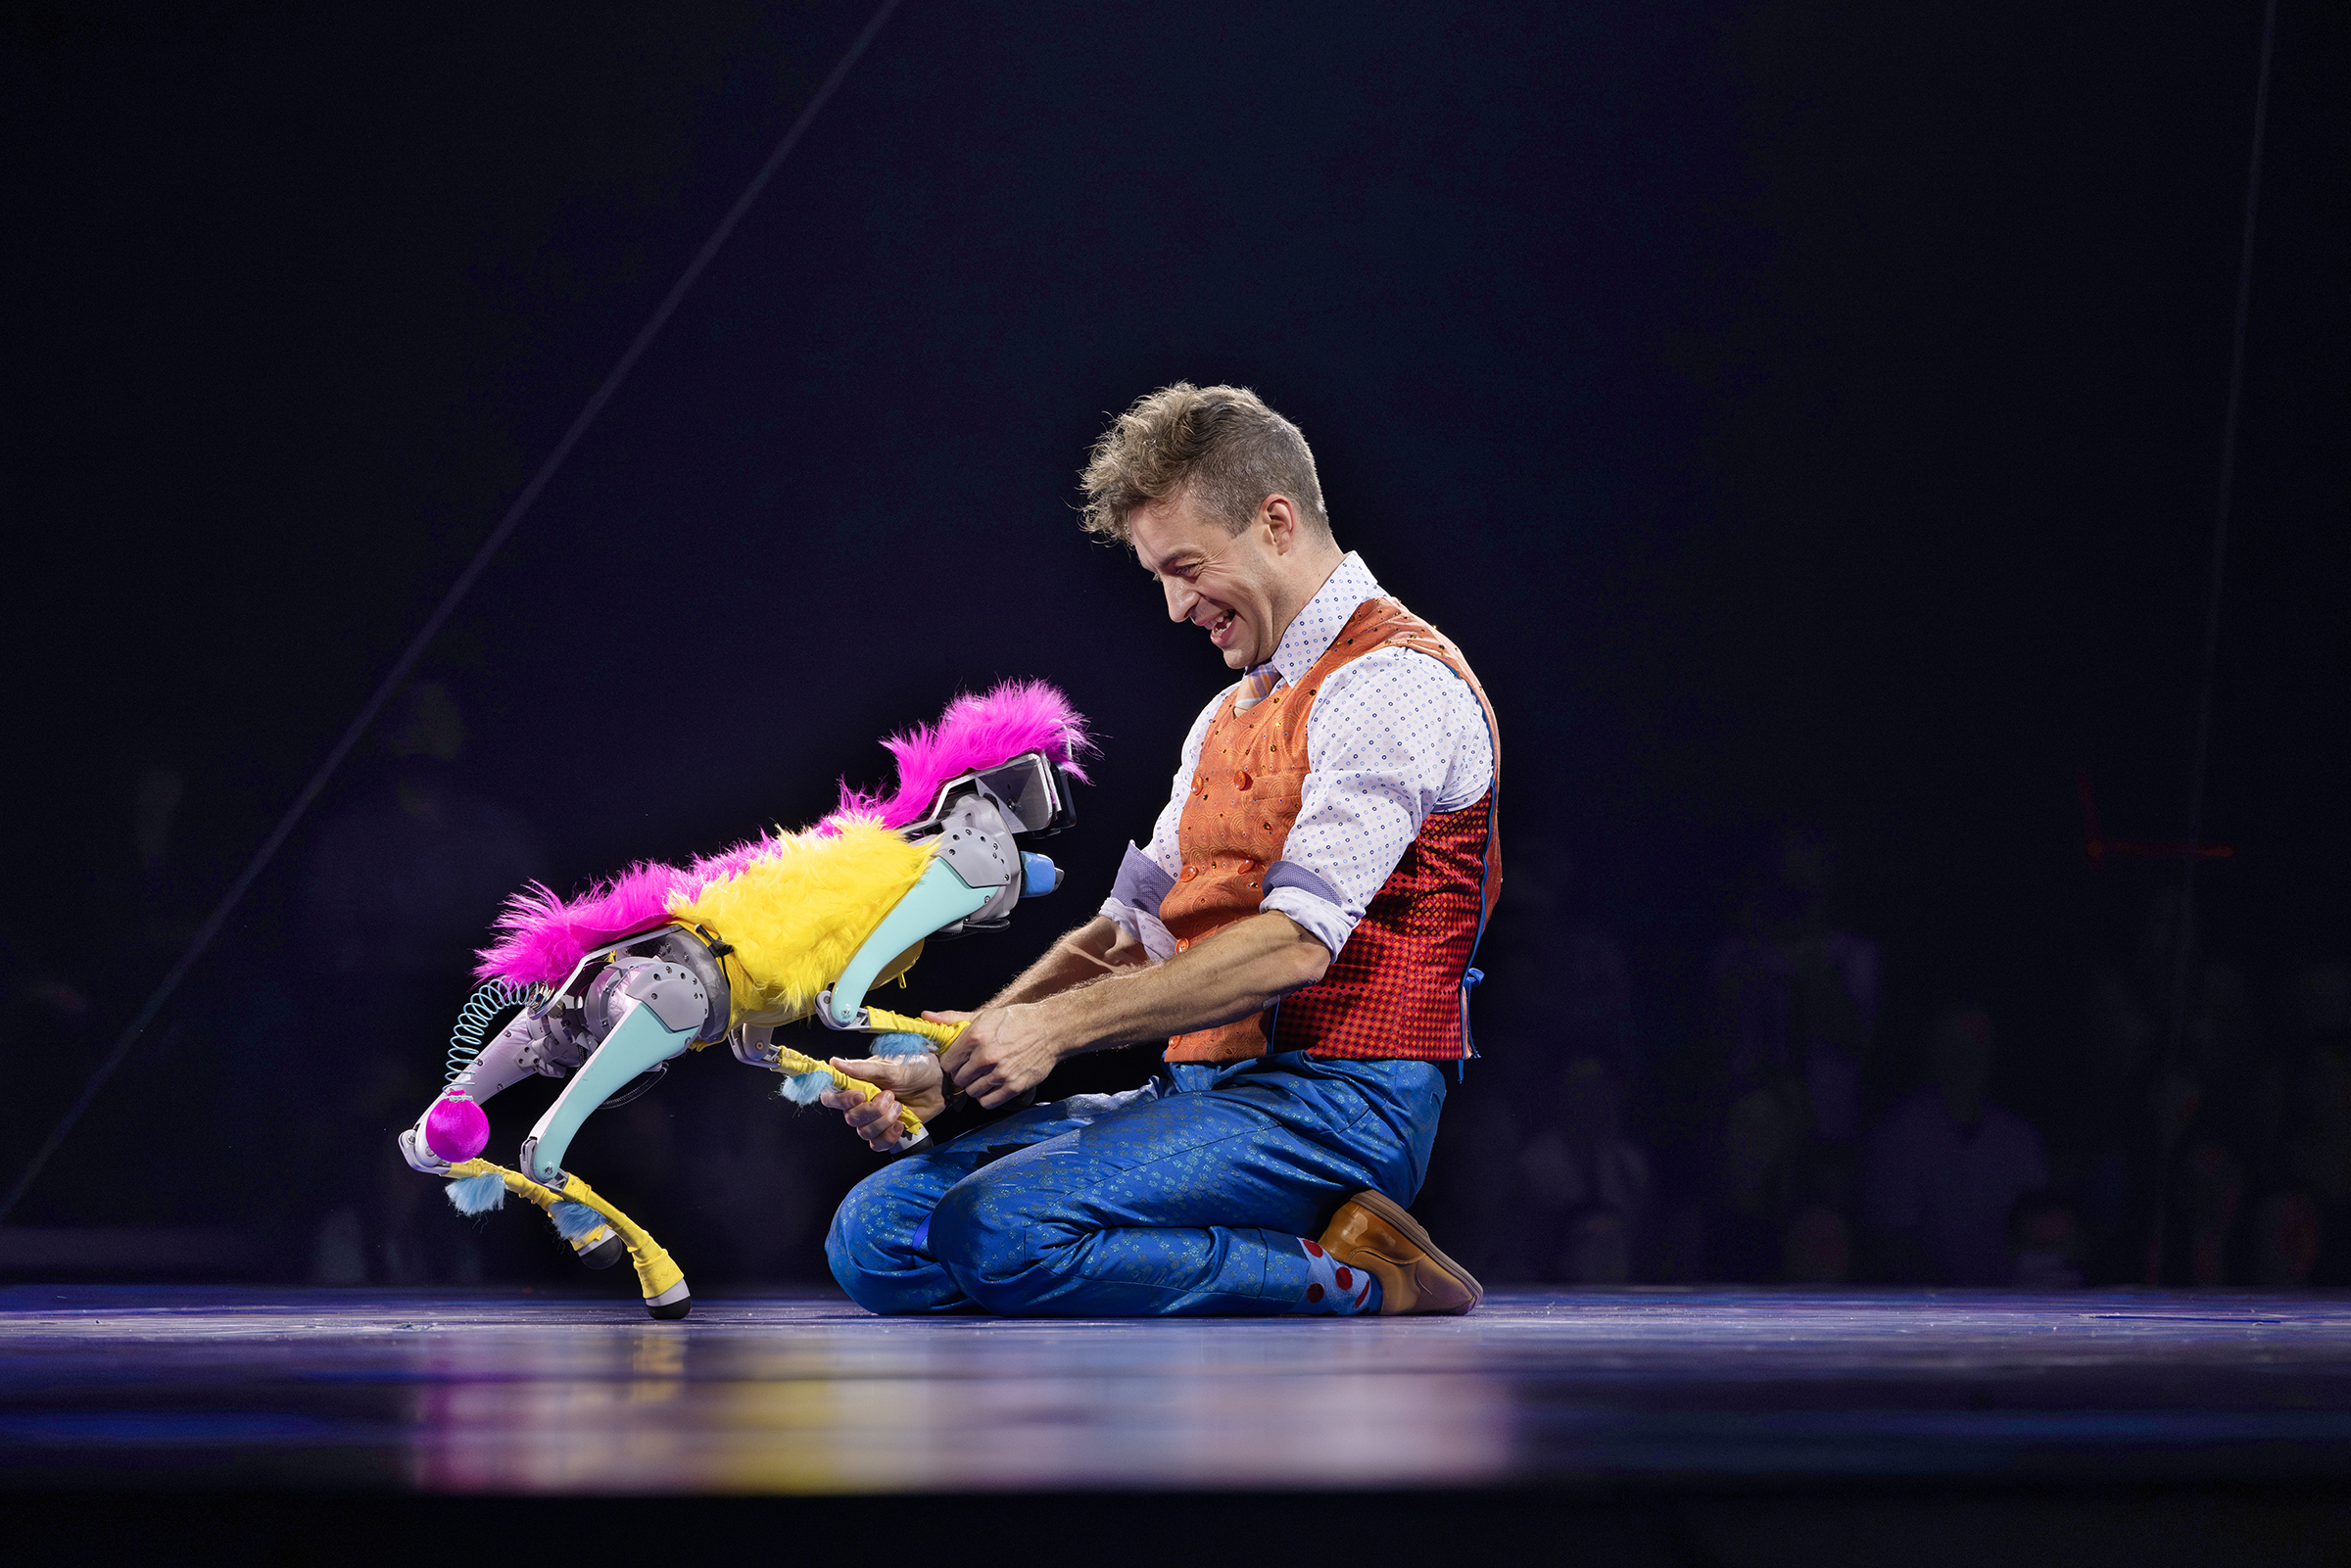 Jan Damm, who plays Nick Nack, an acrobatic comedian and show guide, has fun alongside Bailey, a robotic dog. Photo courtesy of Feld Entertainment. 